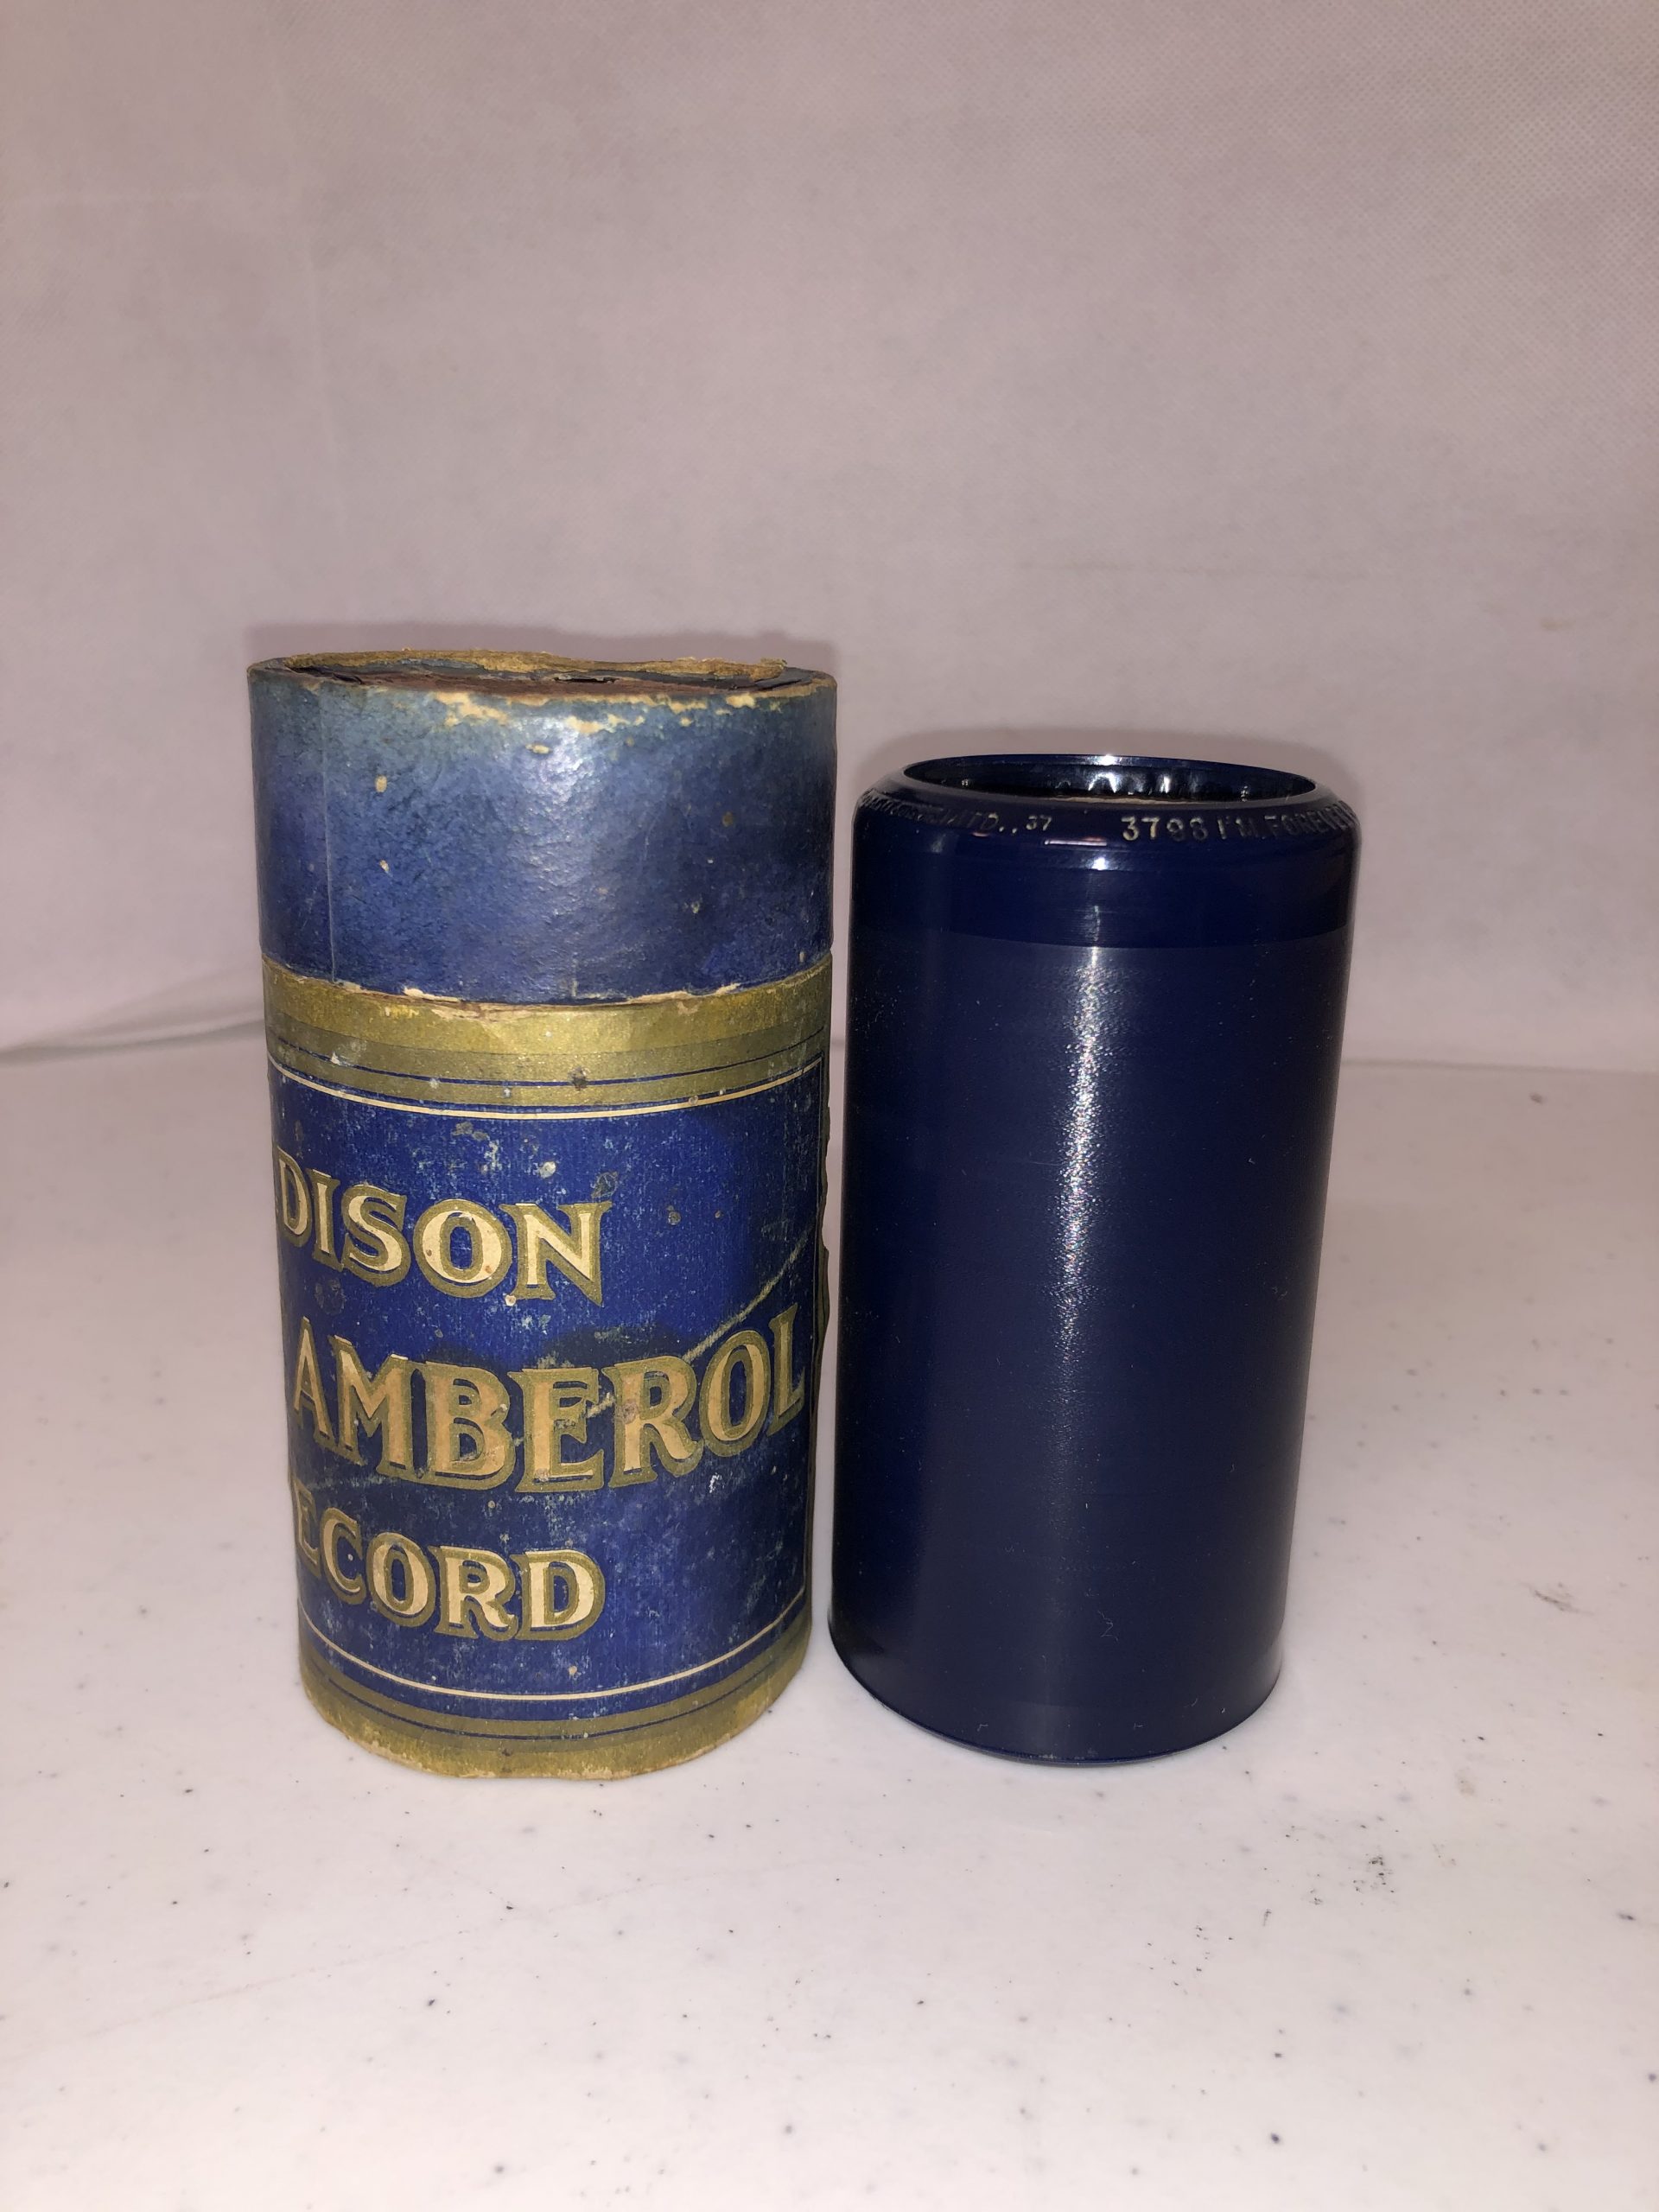 Edison 4 minute Cylinder…”I’ve got the Blues for my Kentucky Home”